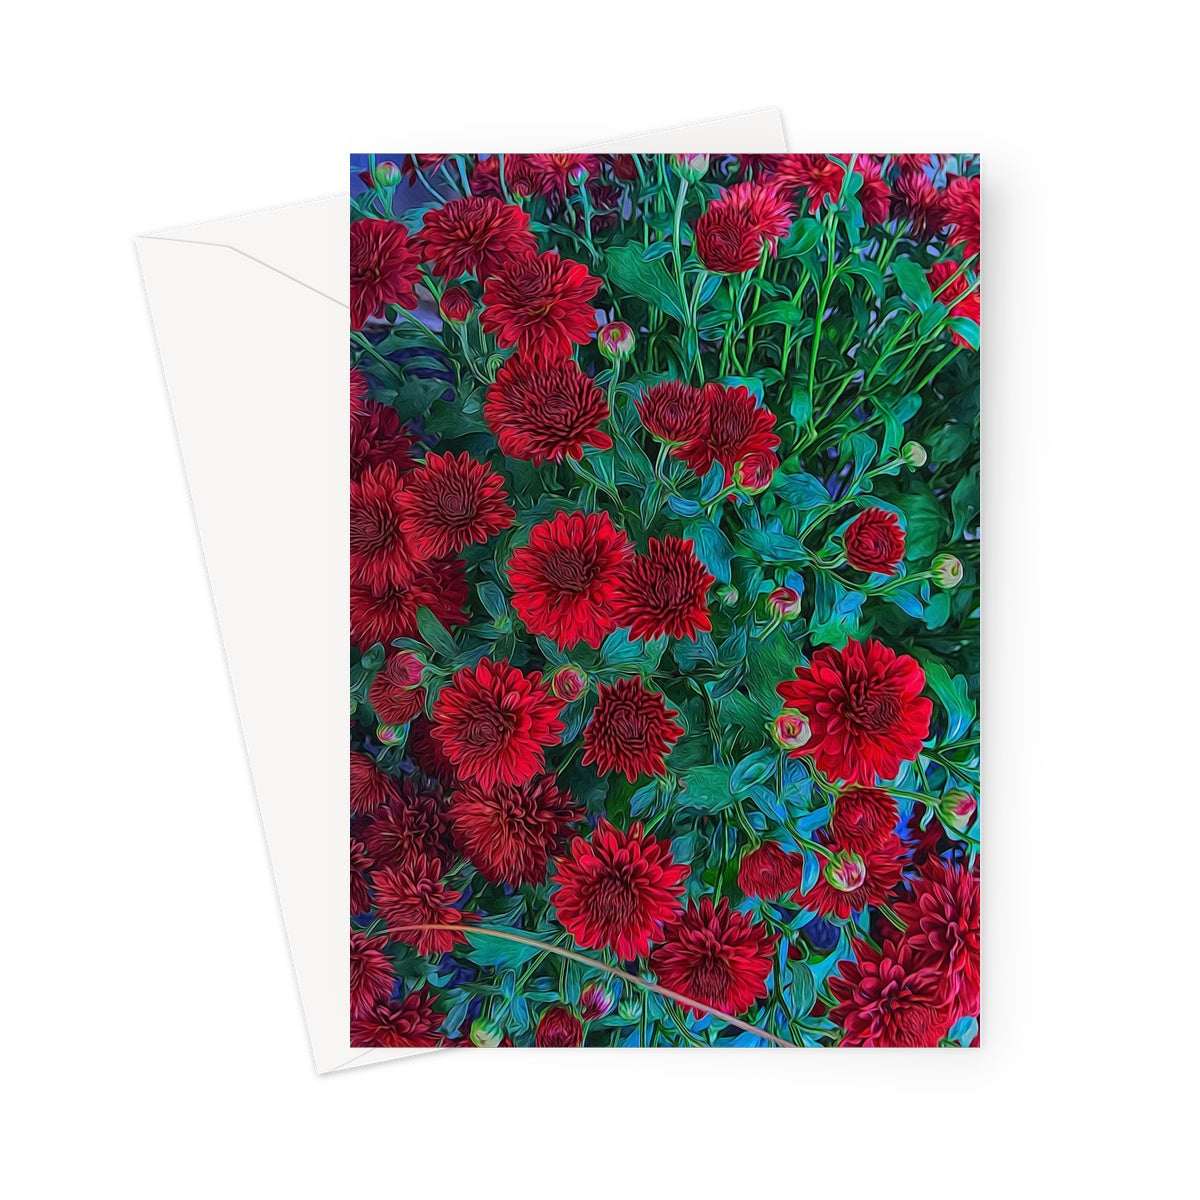 Red Mums Greeting Card